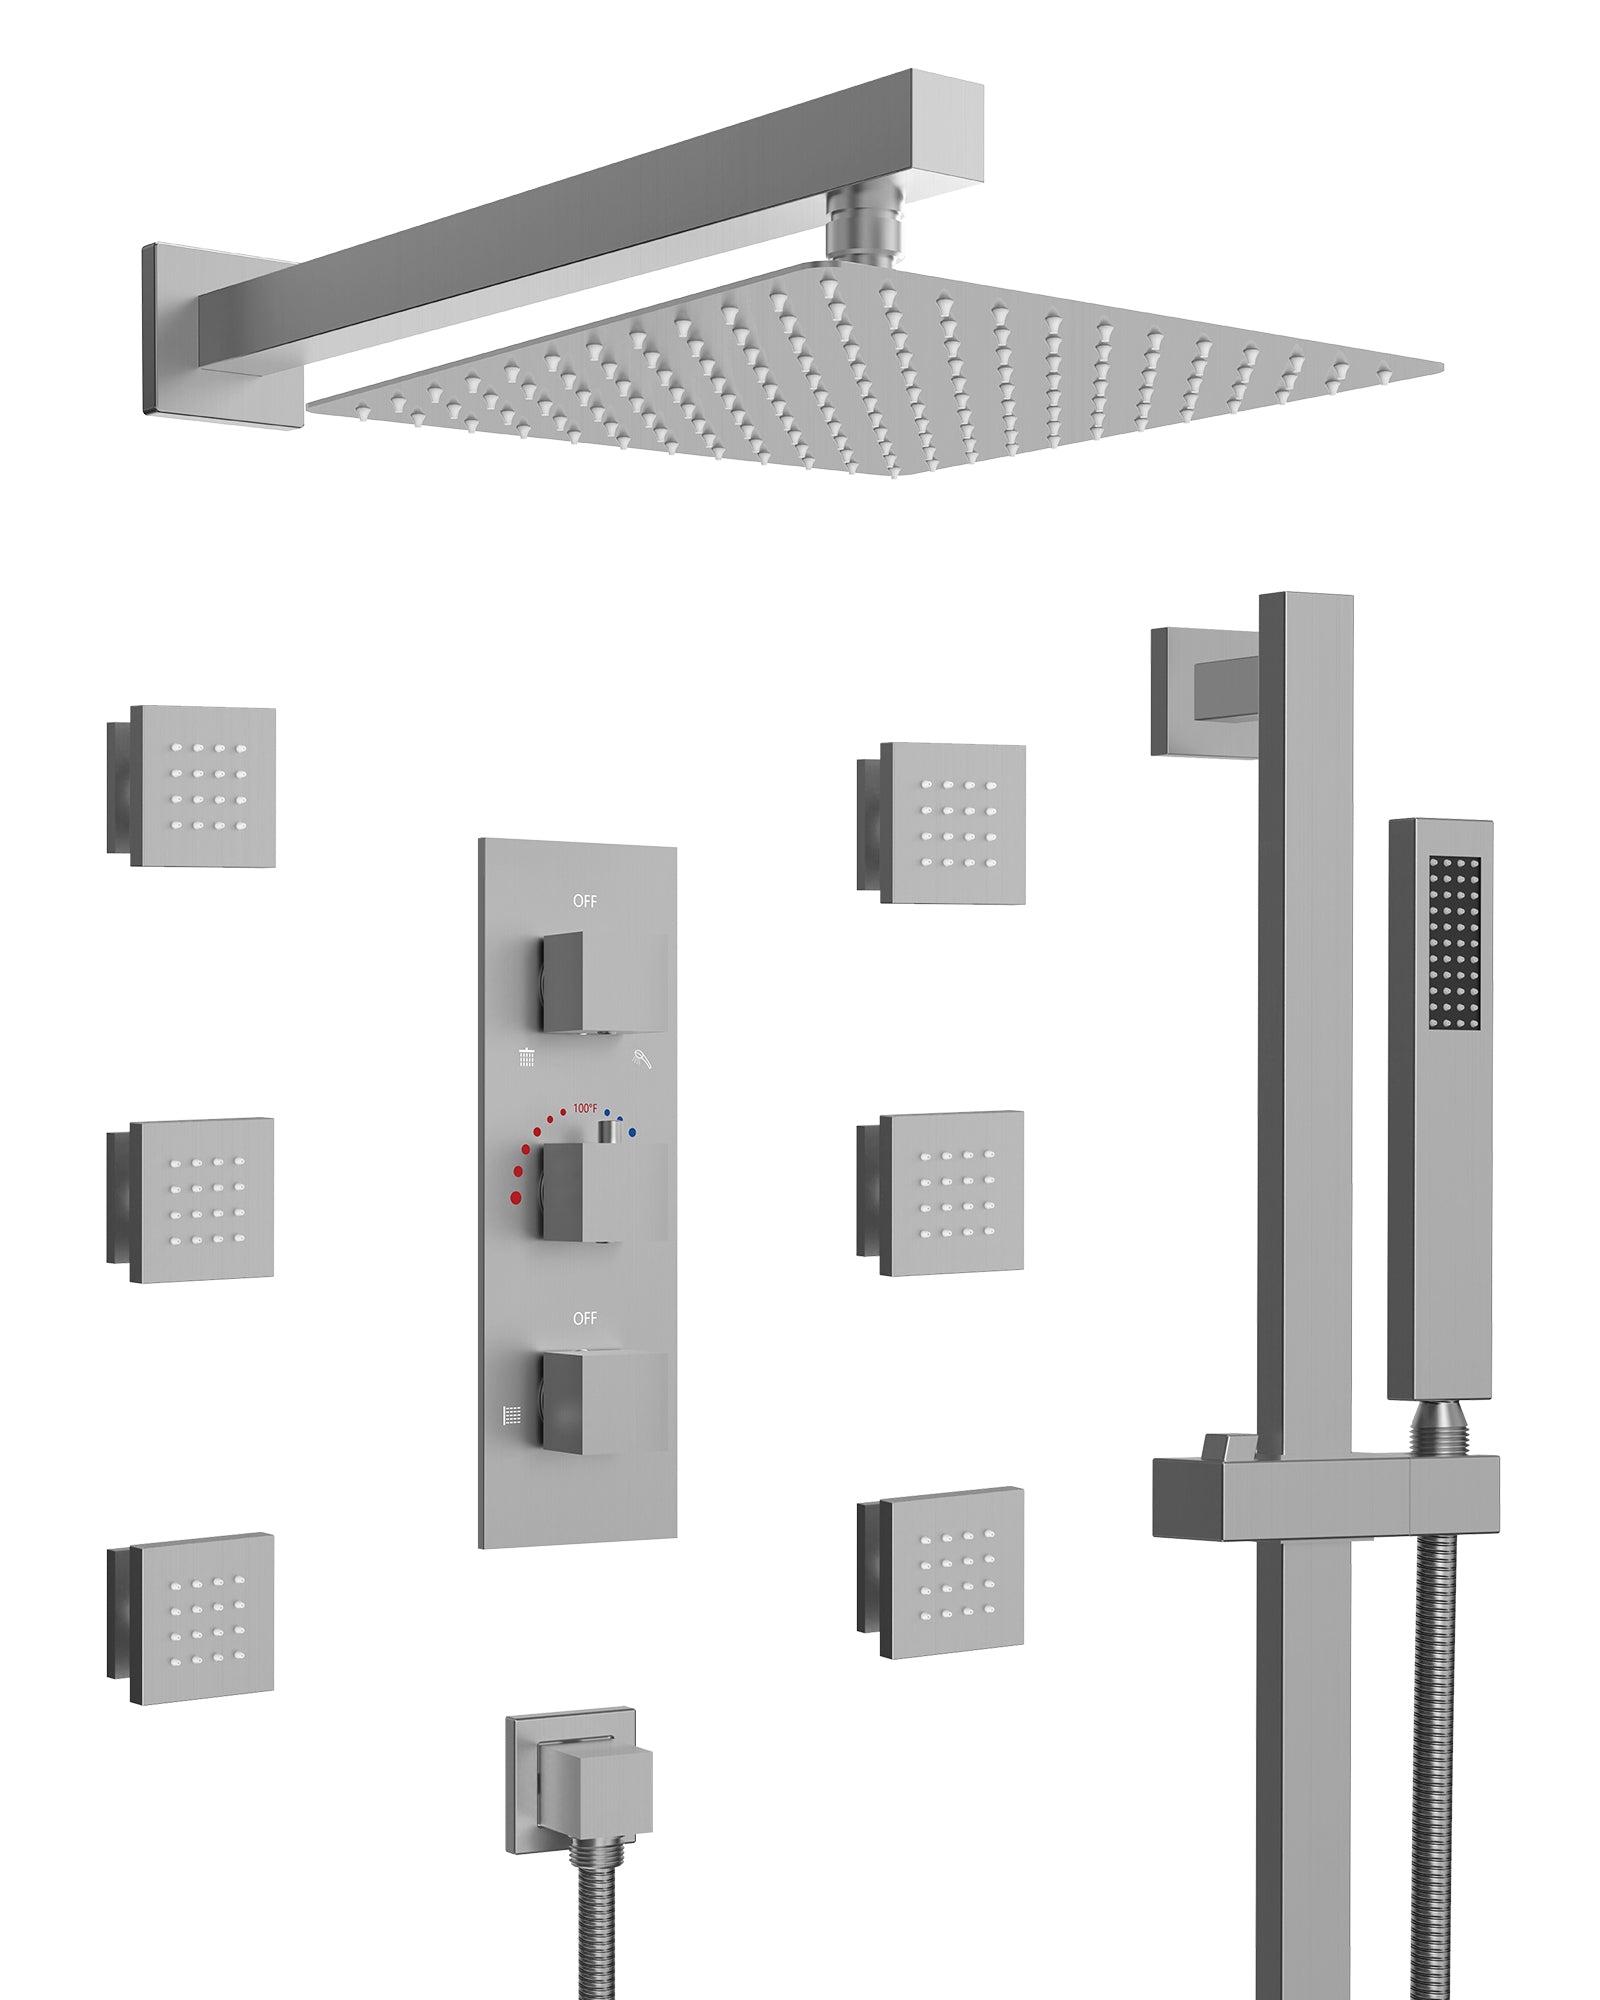 SFS-1016-NK12 EVERSTEIN Luxury wall mounted shower faucet system with fixed device and rough valve, with 6 body massage spray and hand-held shower faucet in Brushed Nickel